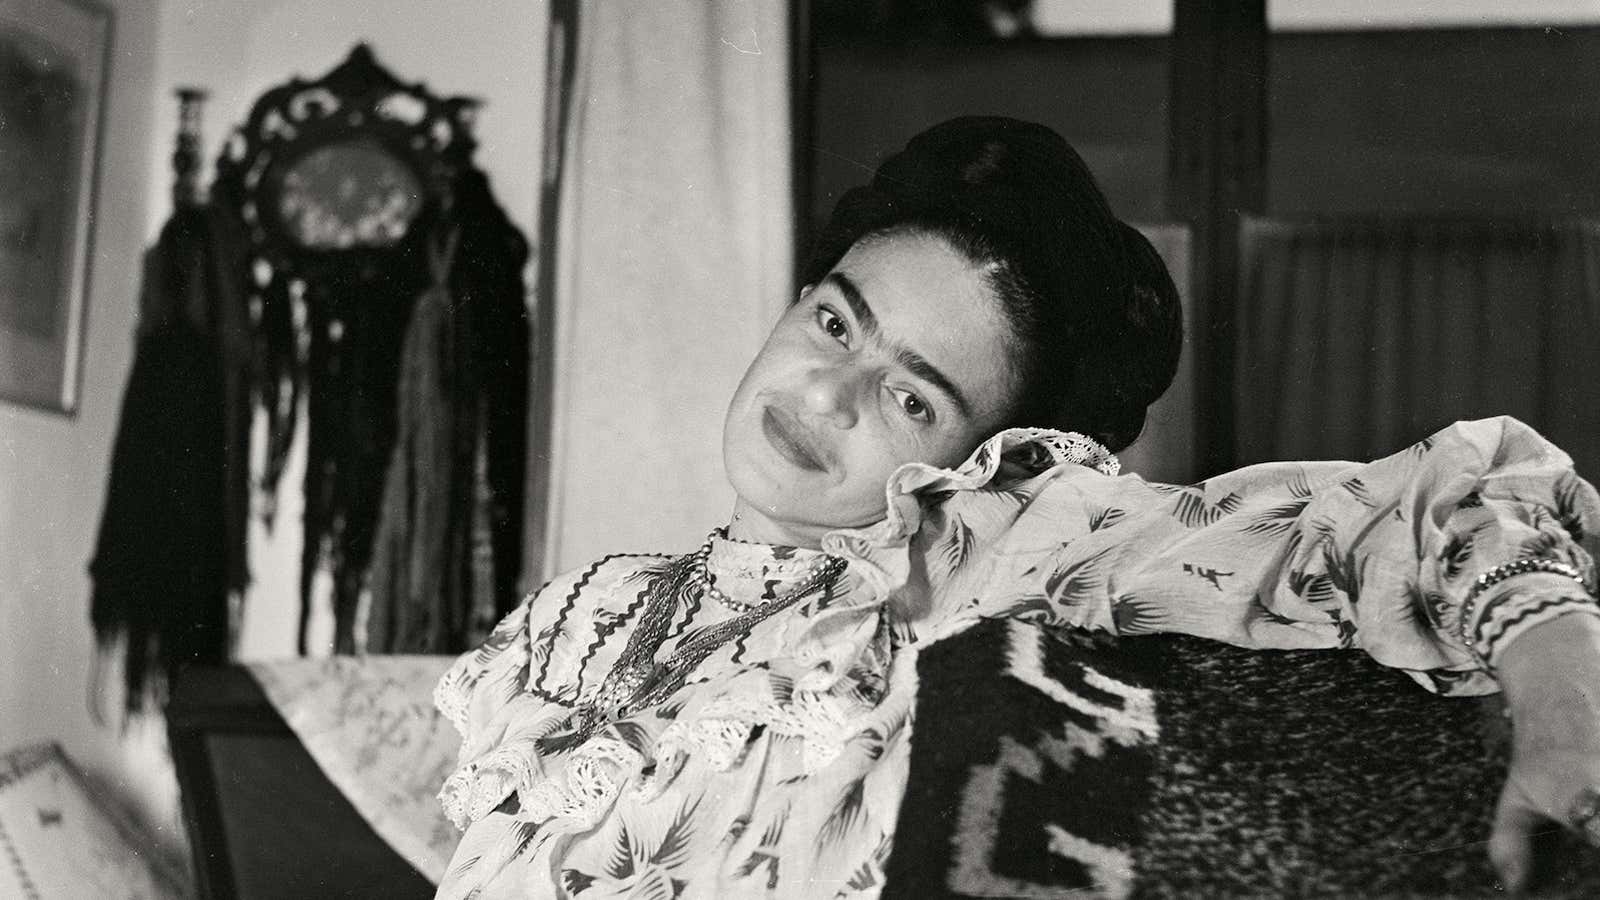 These photos reveal a side of Frida Kahlo you’ve never seen before